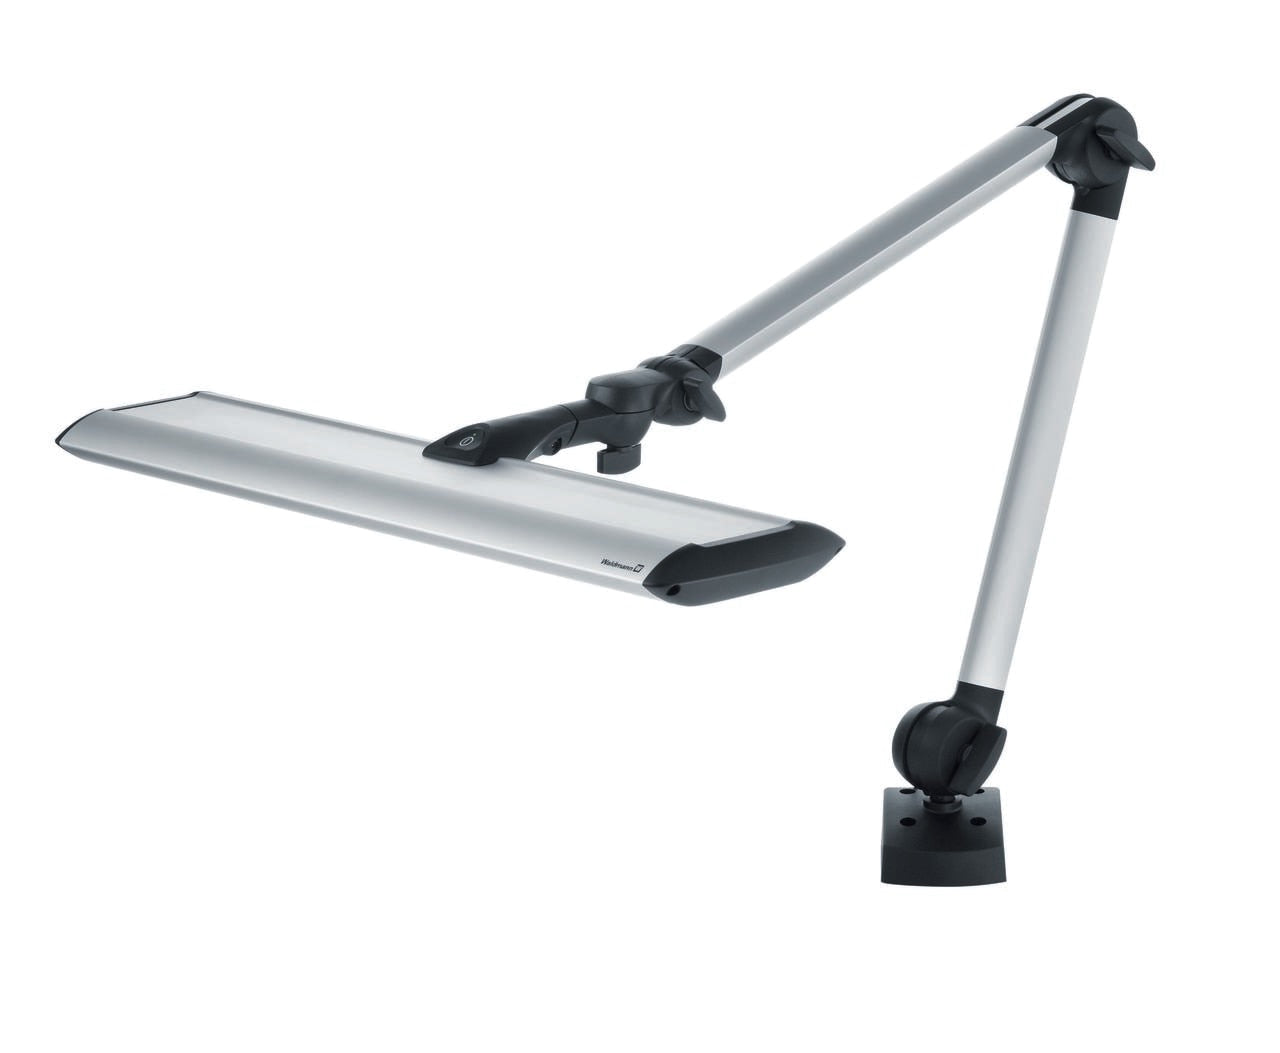 Waldmann 113736000-00810100, TND 2100/930-965/D, TANEO LED Task Light; Articulating Arm, 22.7 in., Satine Lens, w/ Tunable Color Temperature